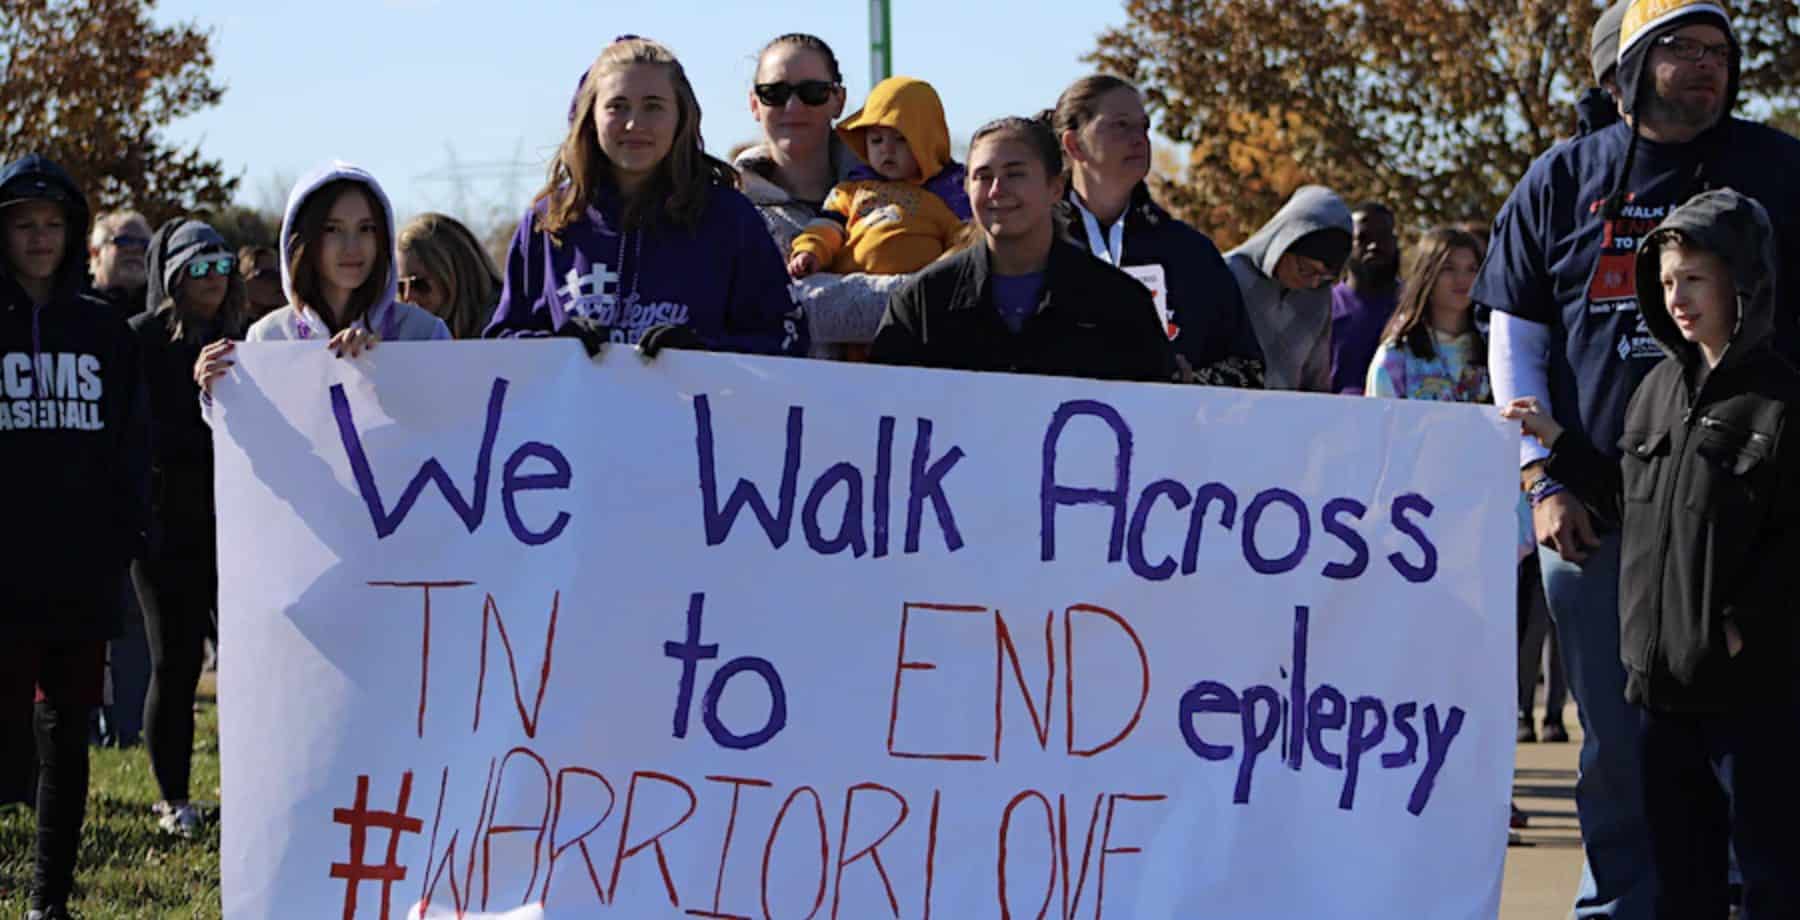 Walk to END Epilepsy in Middle Tennessee.